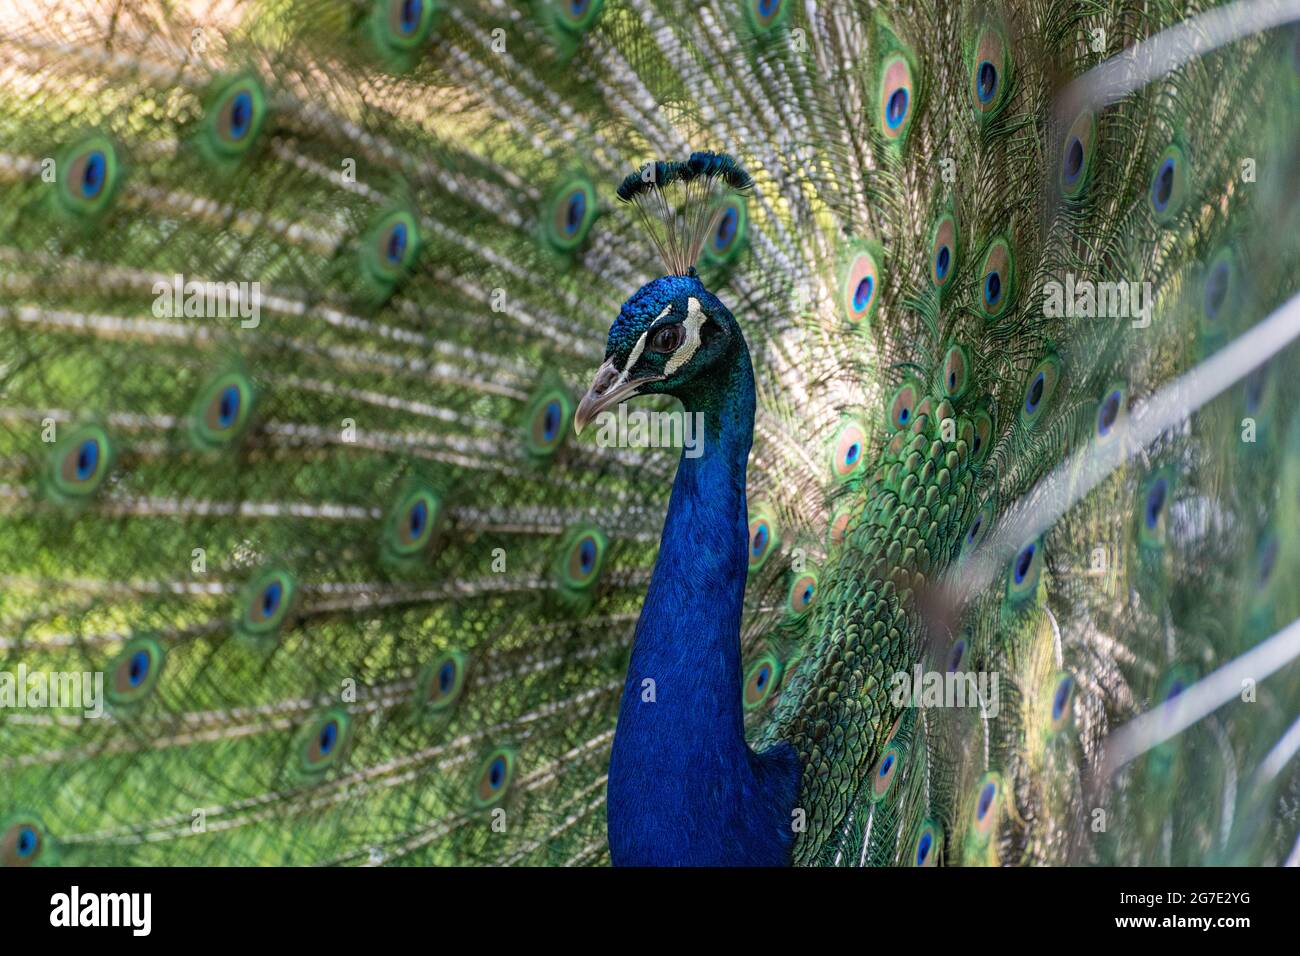 close up portrait of a displaying peacock Stock Photo